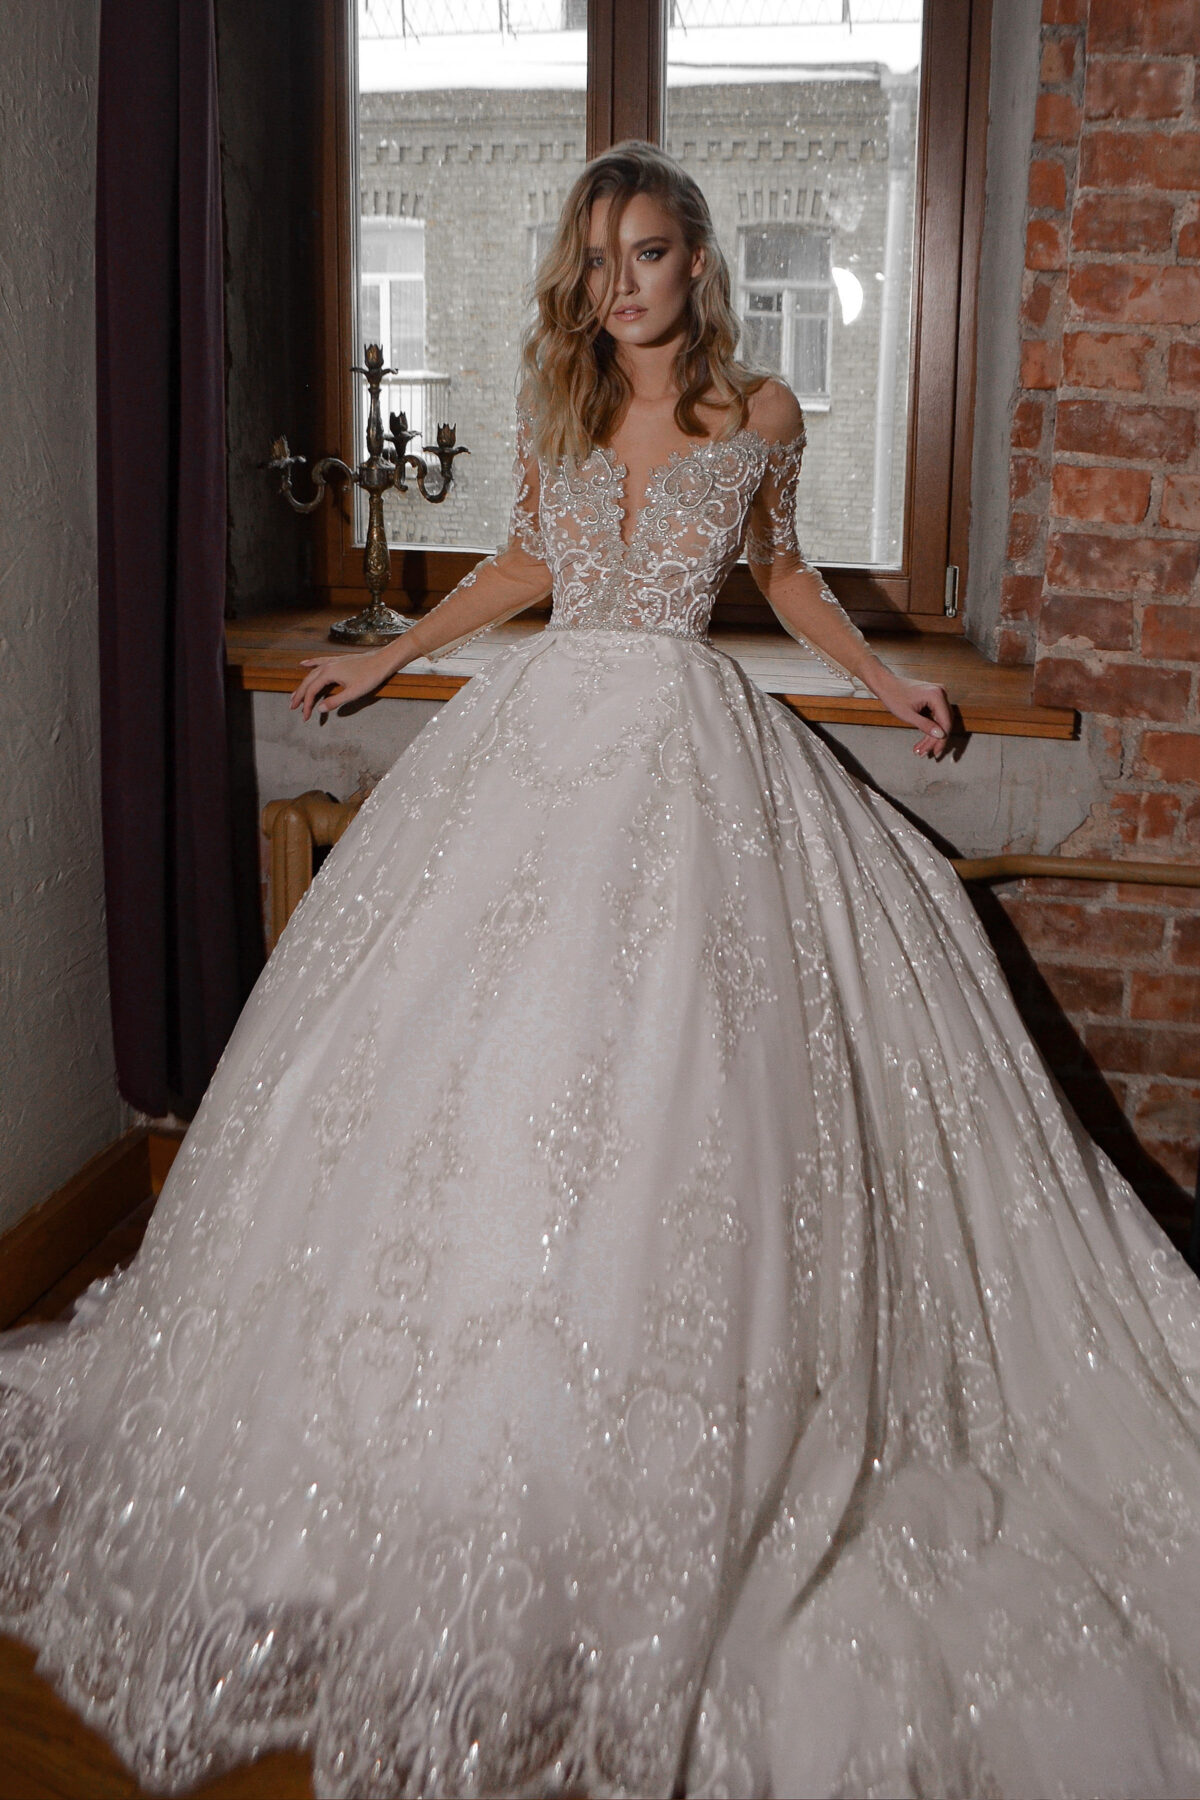 Sparkly Ball Gown Batist by Olivia Bottega